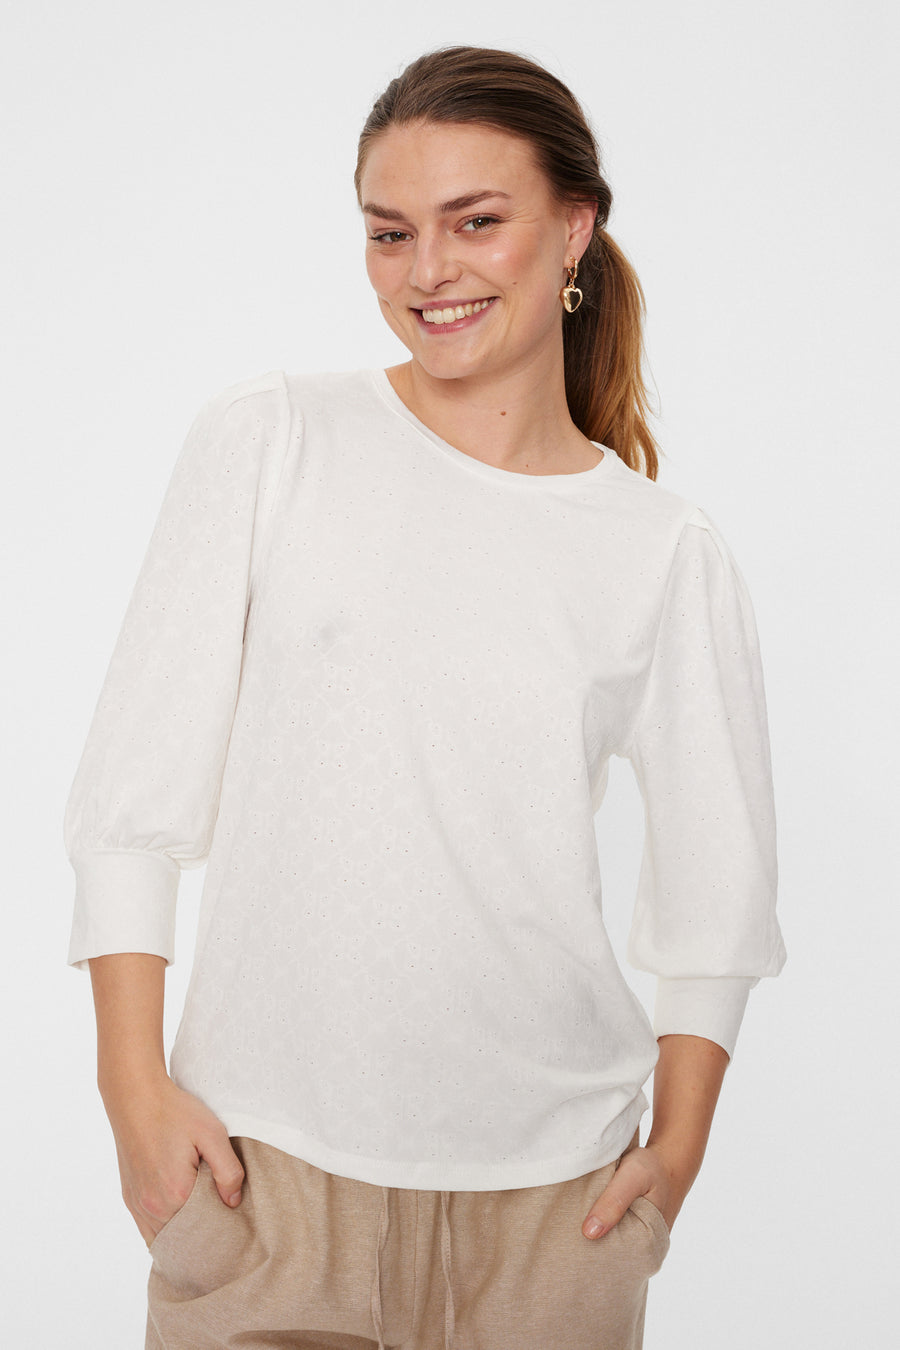 FQBLOND - BLOUSE WITH BALLOON SLEEVES - WHITE